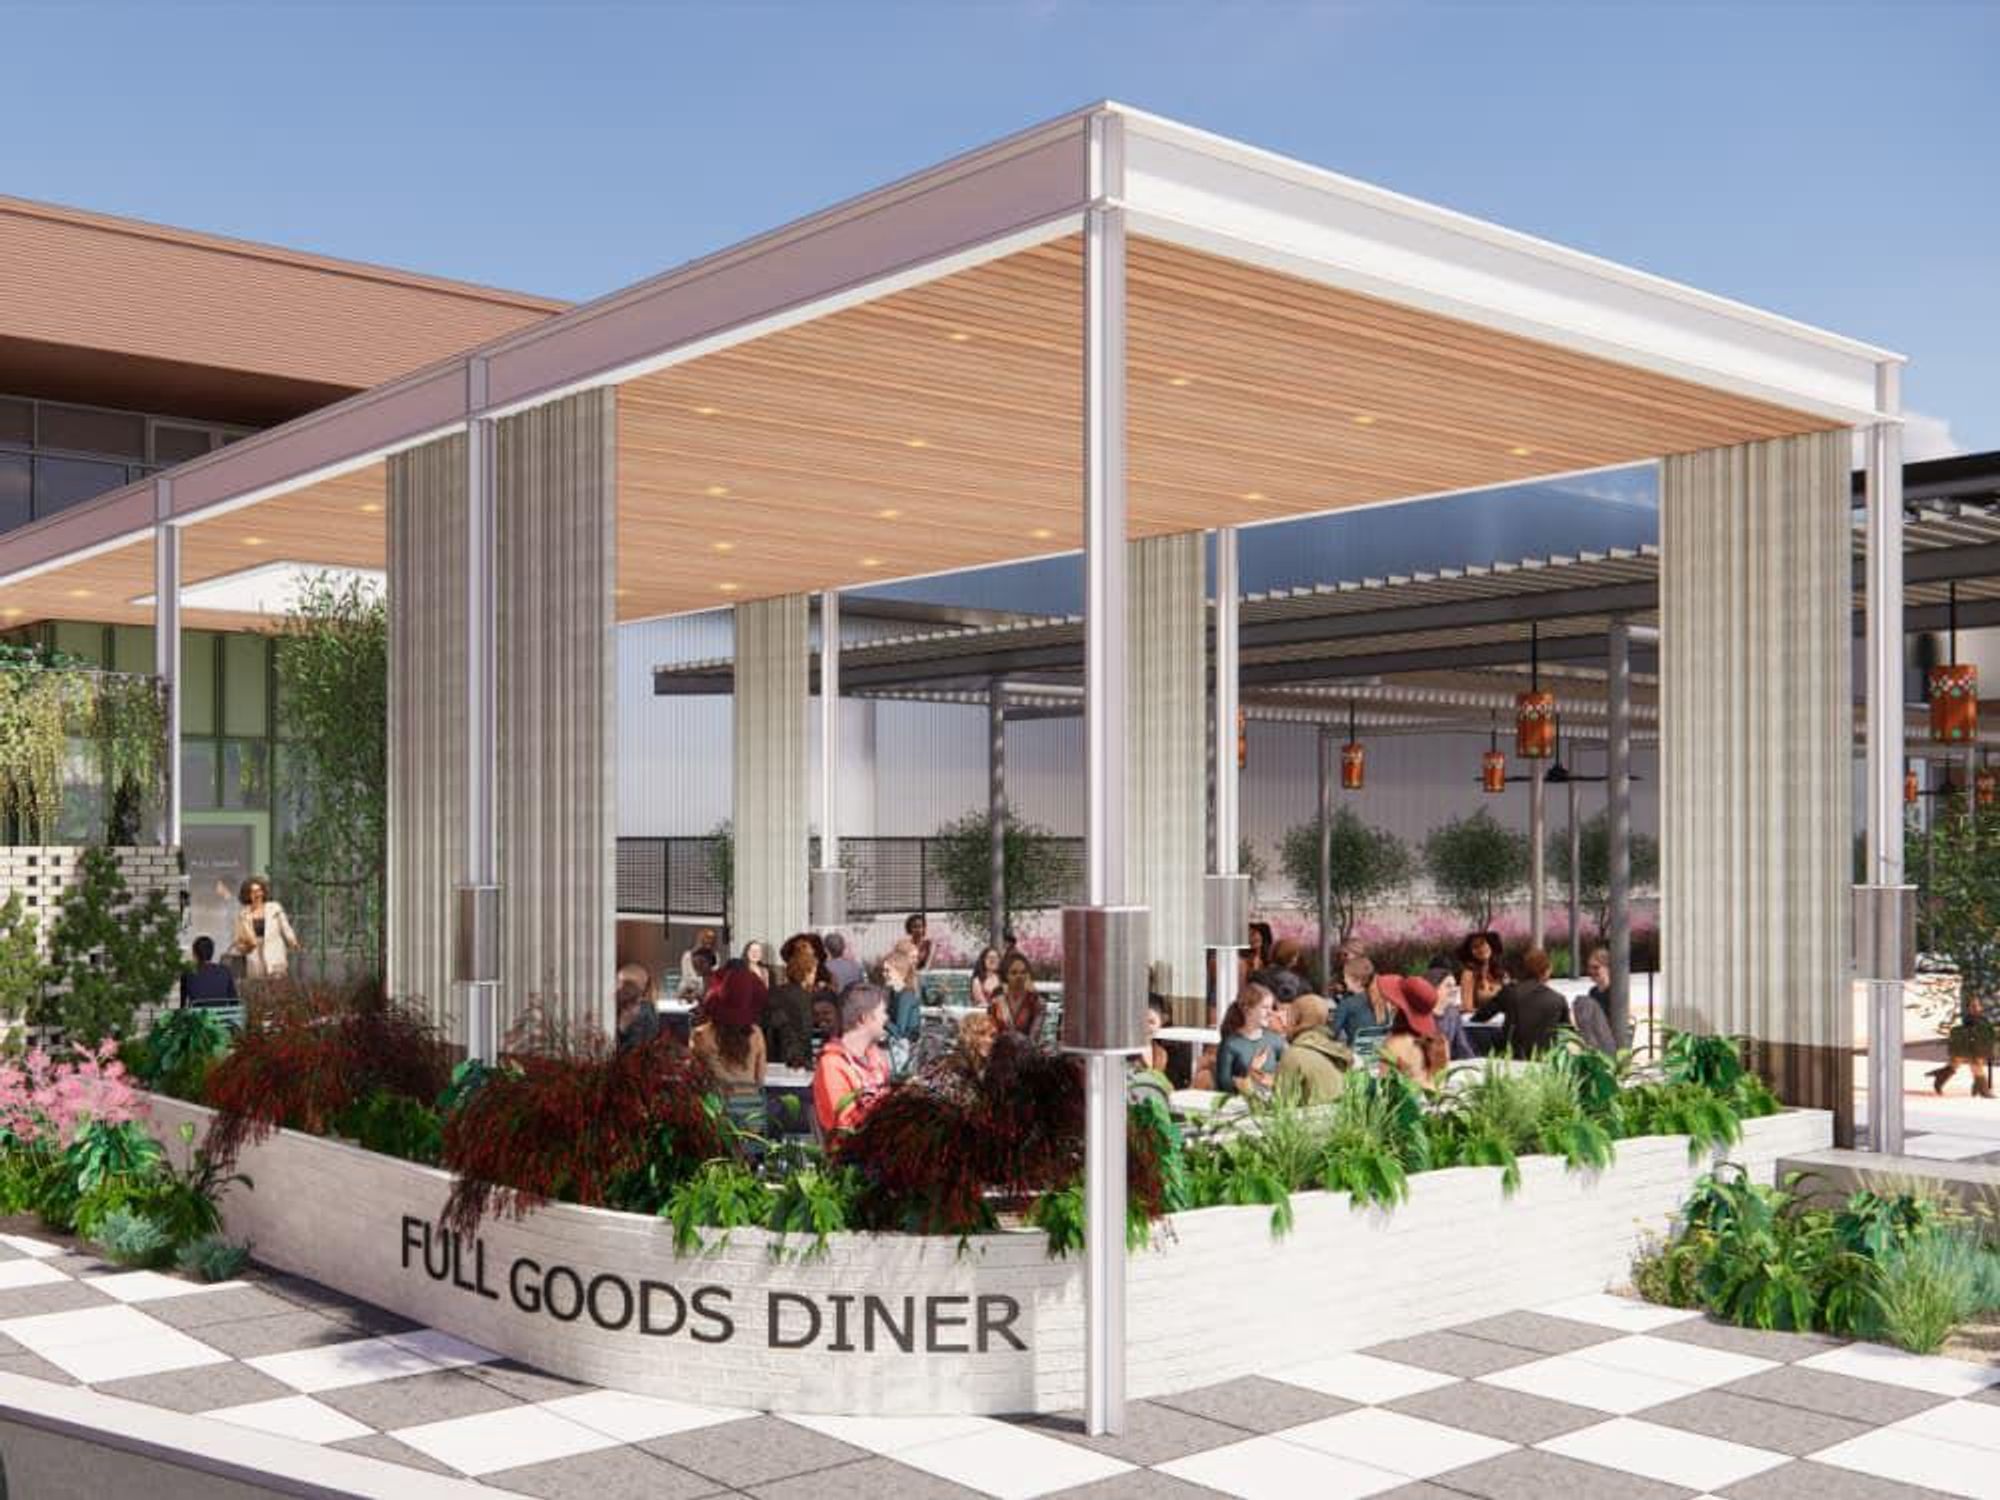 Full Goods Diner will anchor Pearls upcoming plaza.